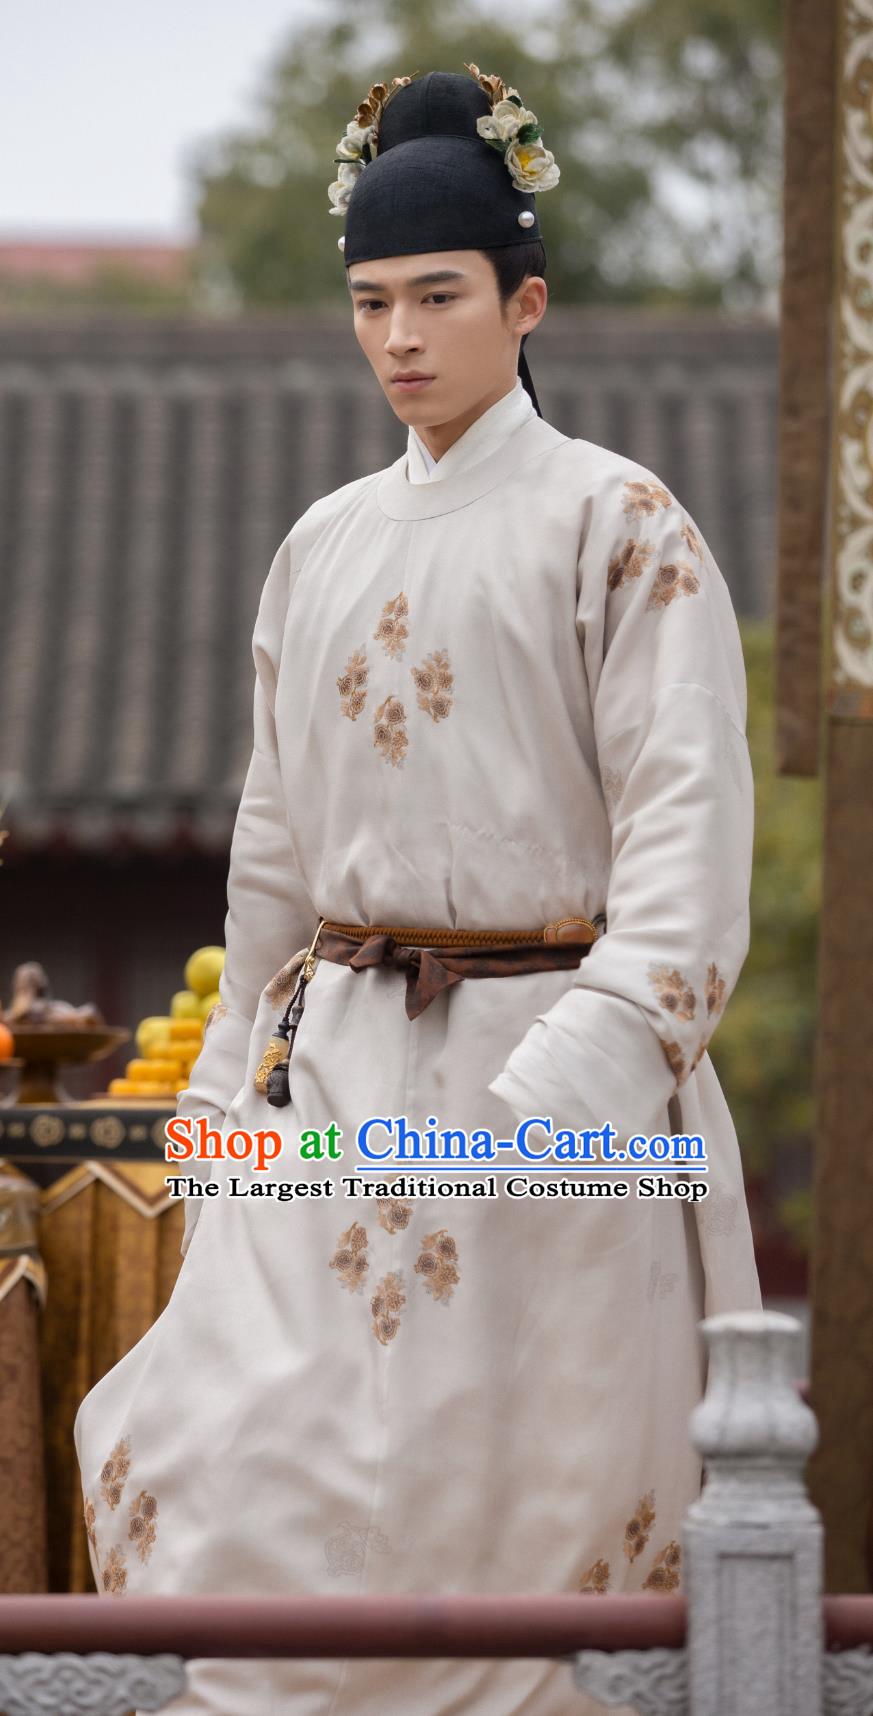 Chinese Song Dynasty Noble Childe Clothing Drama Scent Of Time Ancient Young Lord Zhong Xi Wu Robes